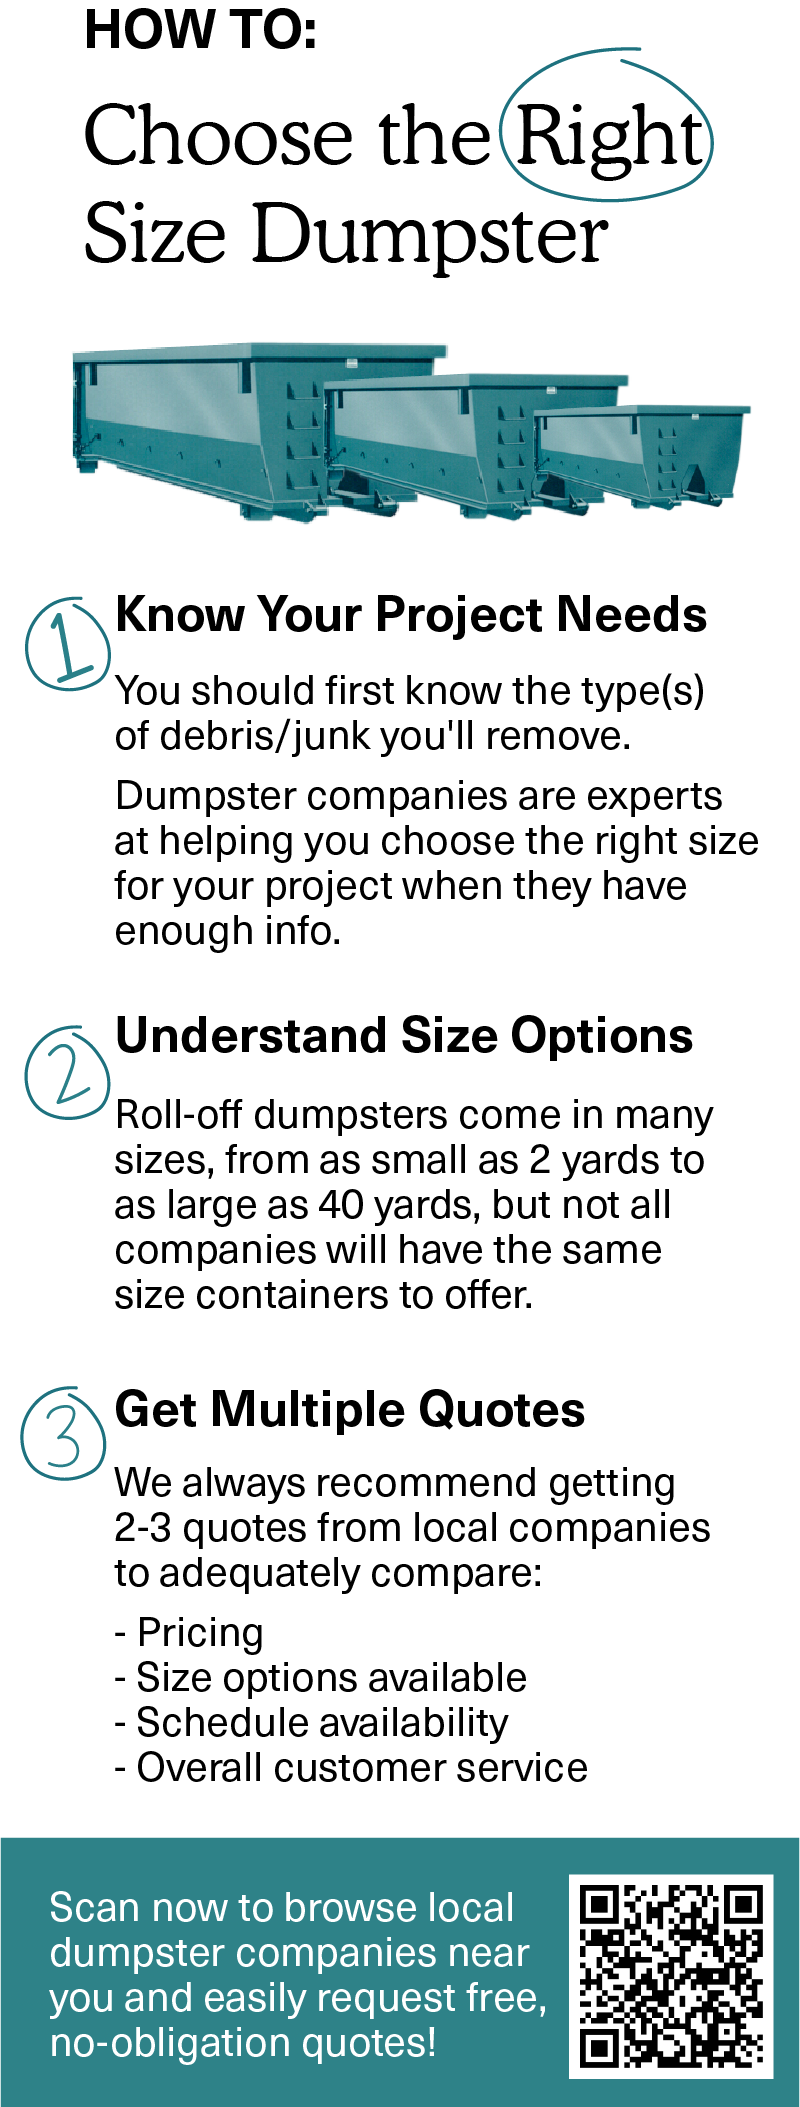 choose the right size dumpster infographic